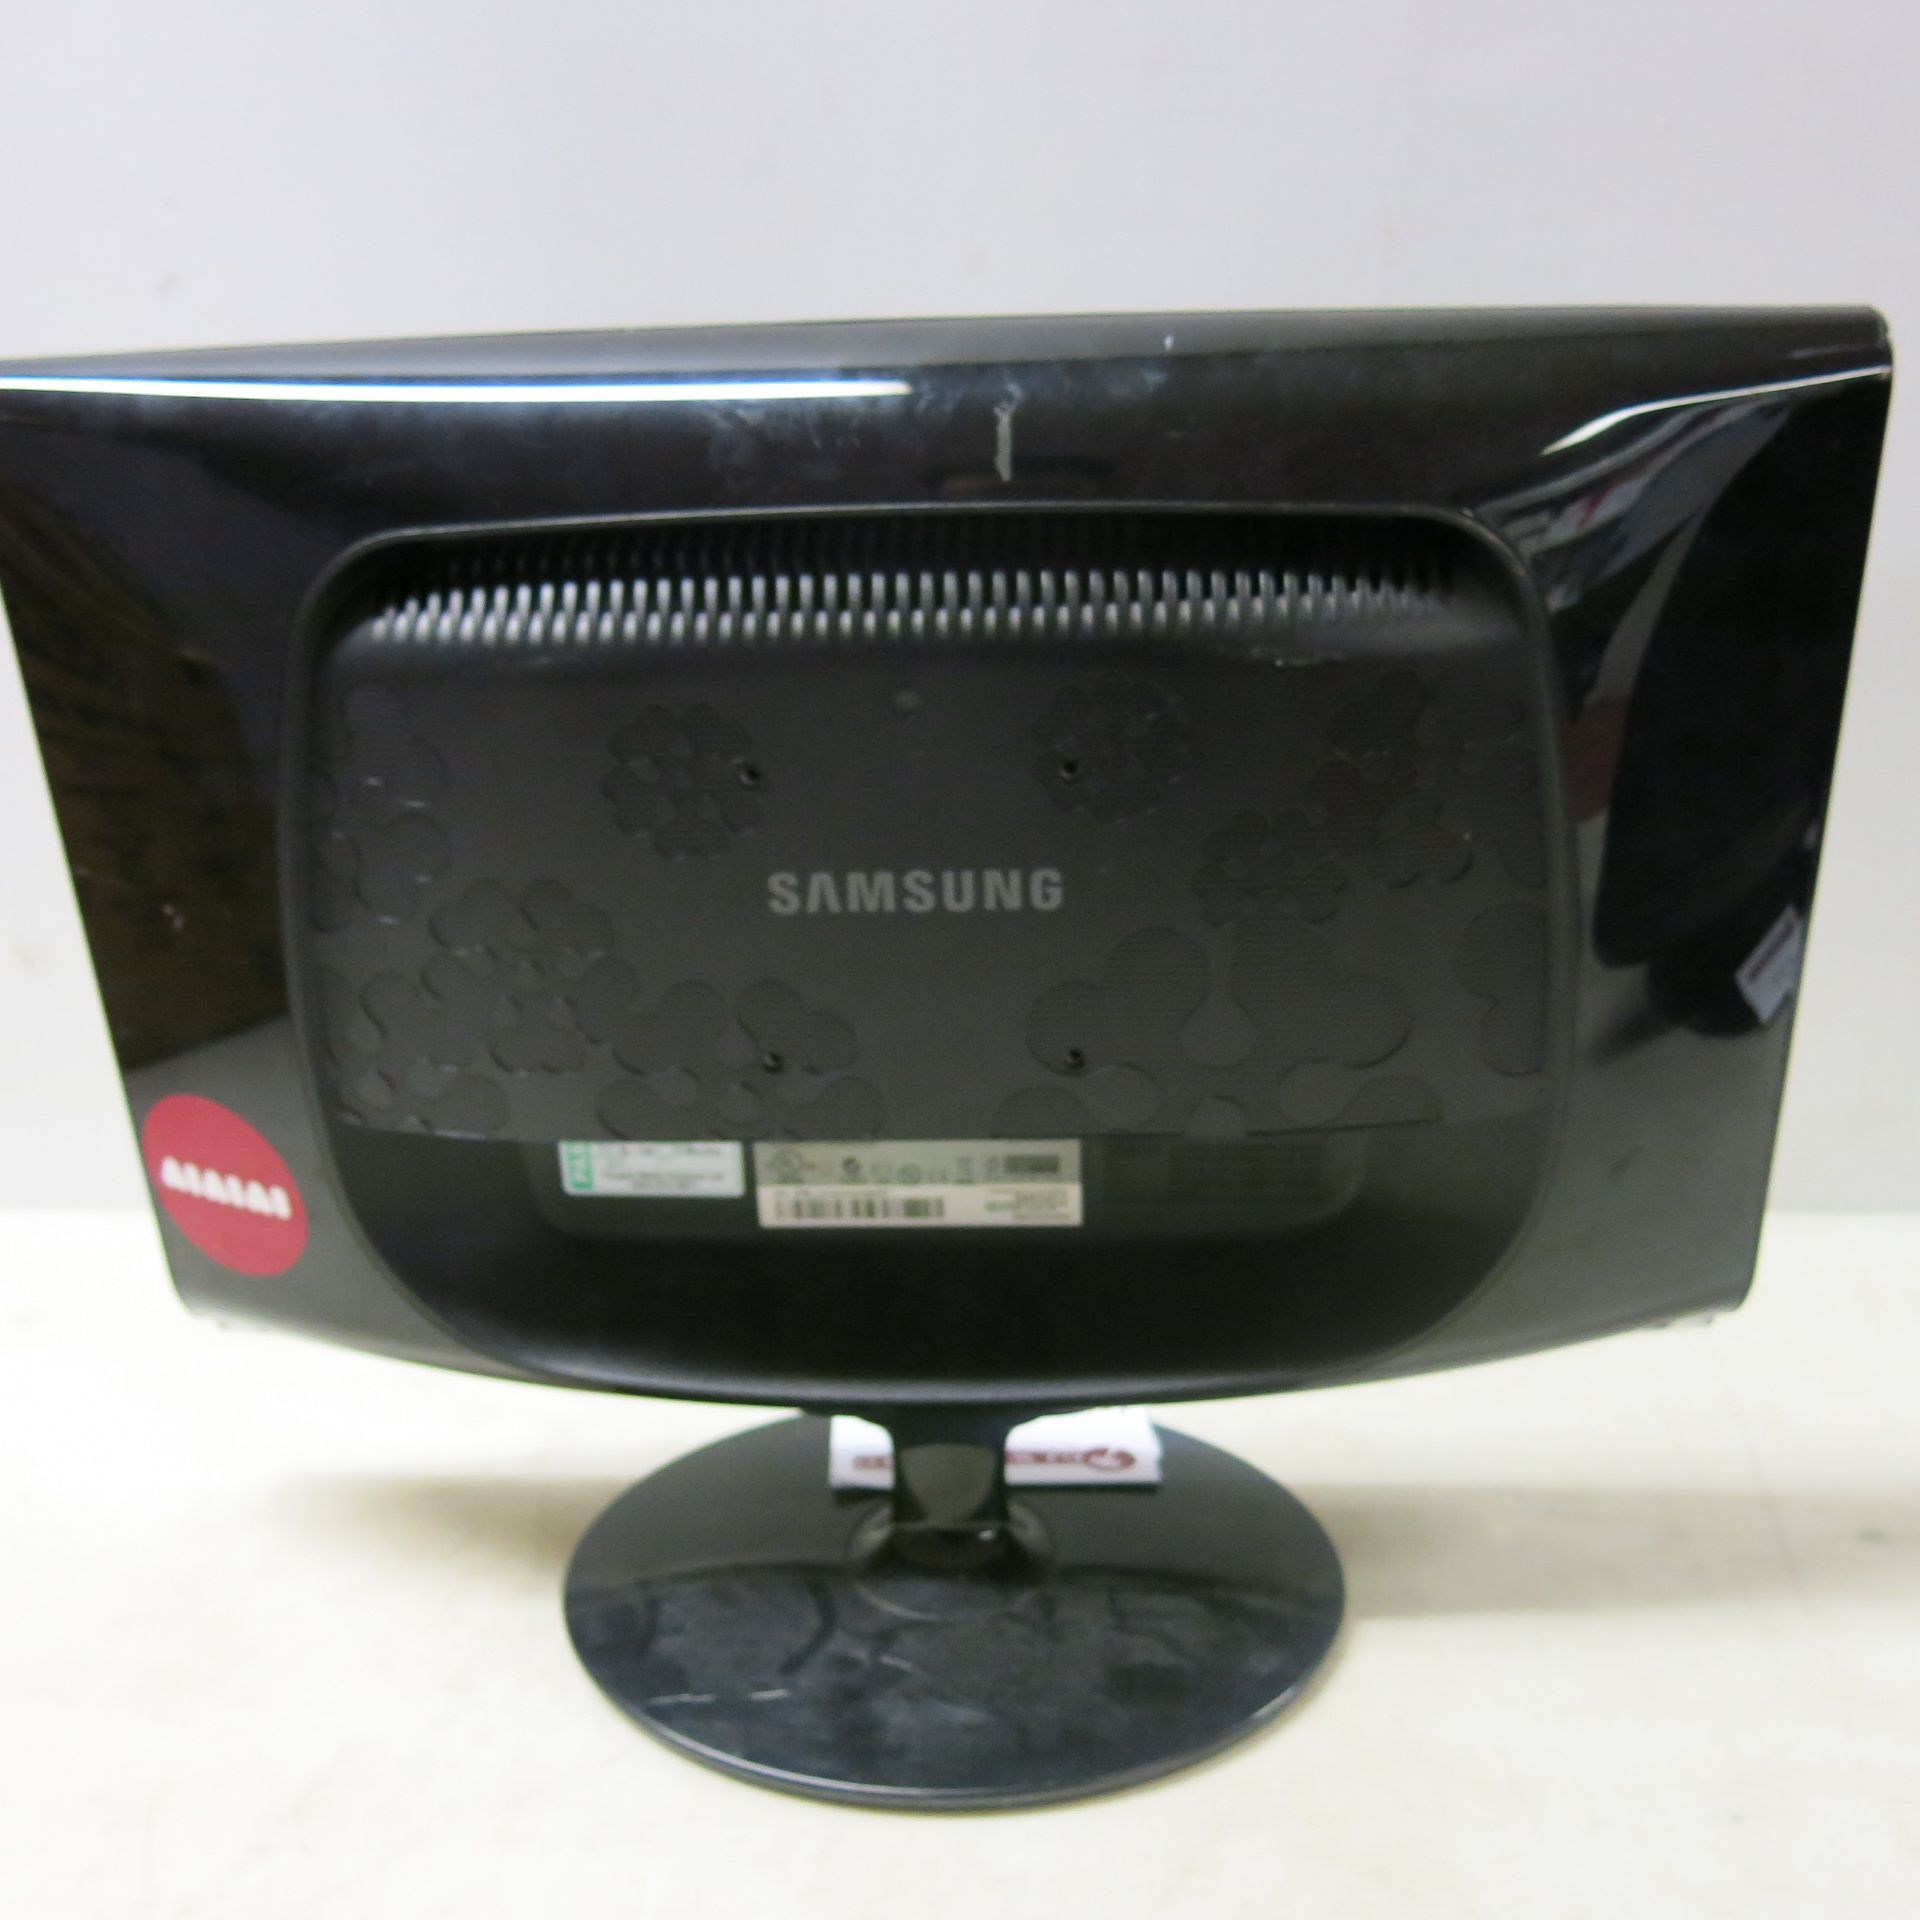 Samsung 19" Colour Display Monitor, Model CM19WS - Image 2 of 2